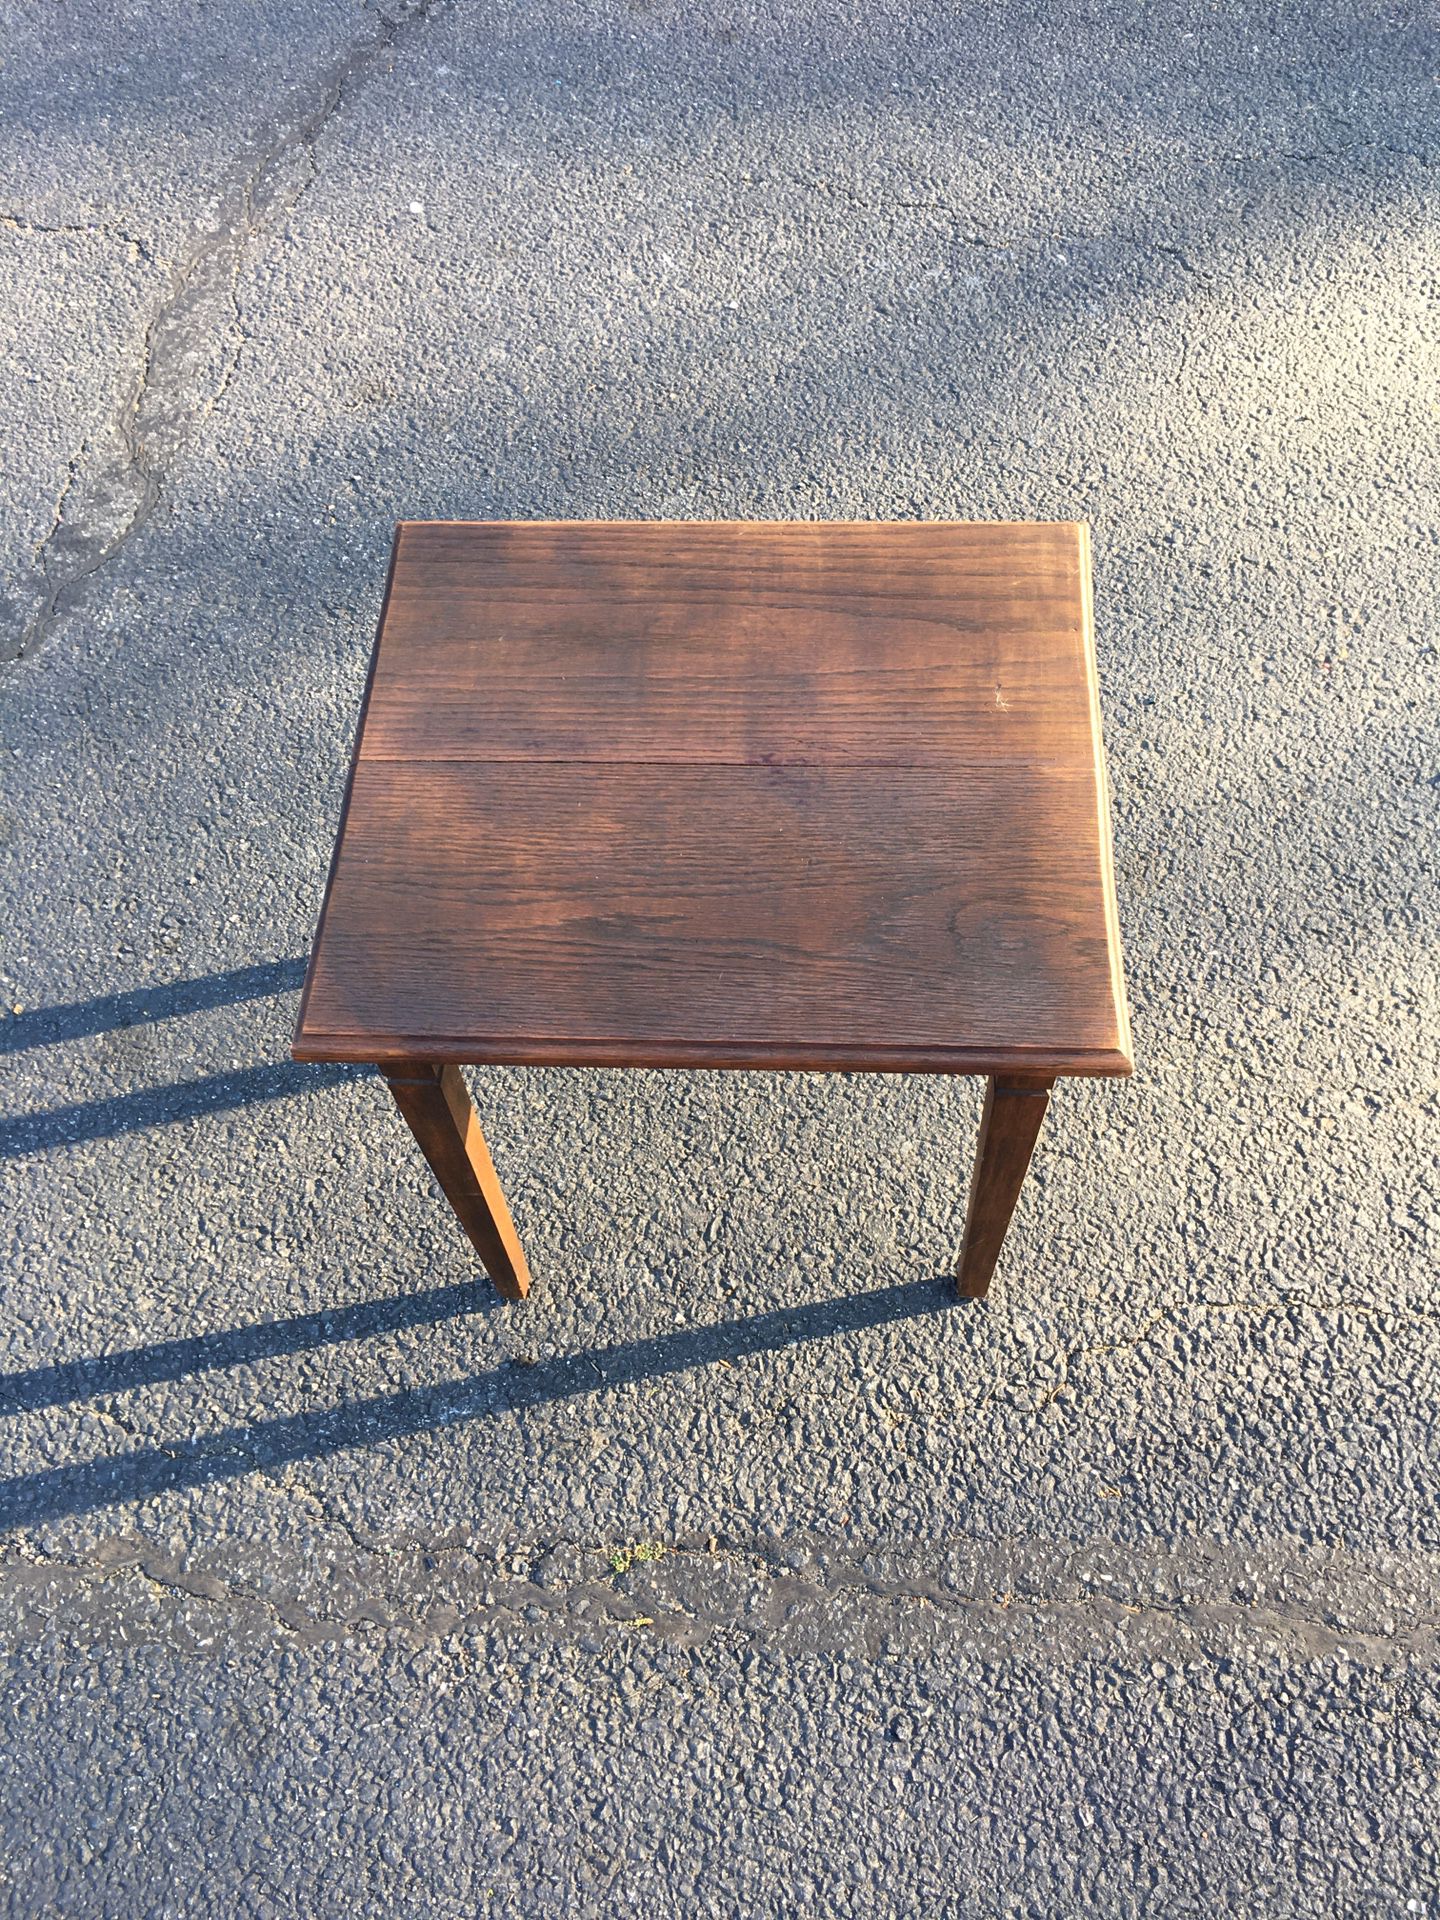 Mid century wooden side table